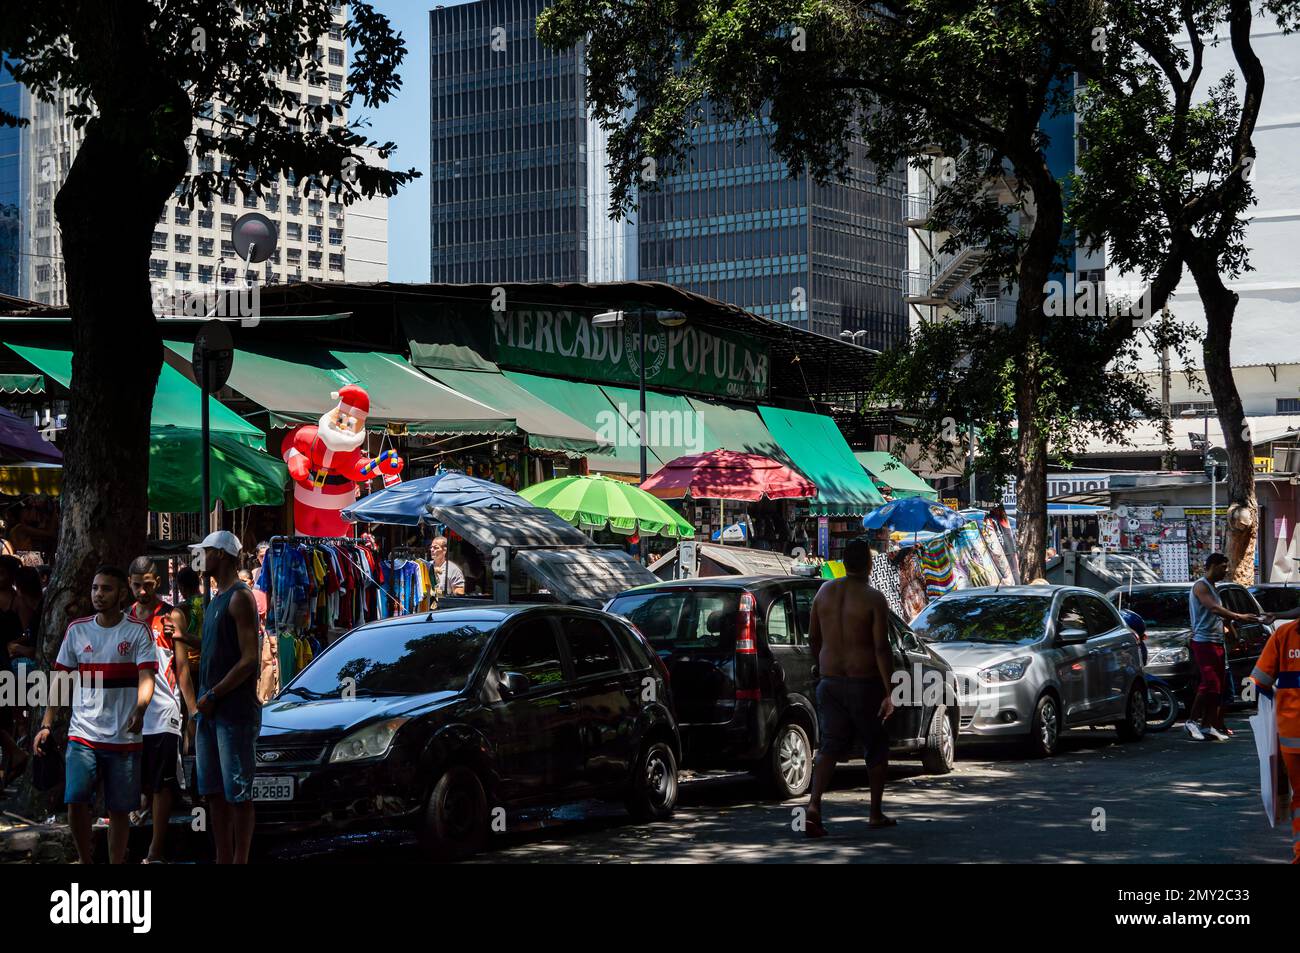 The entrance of Uruguaiana popular market with lots of umbrellas and cars parked at it in Centro district under tree shade in a summer sunny day. Stock Photo